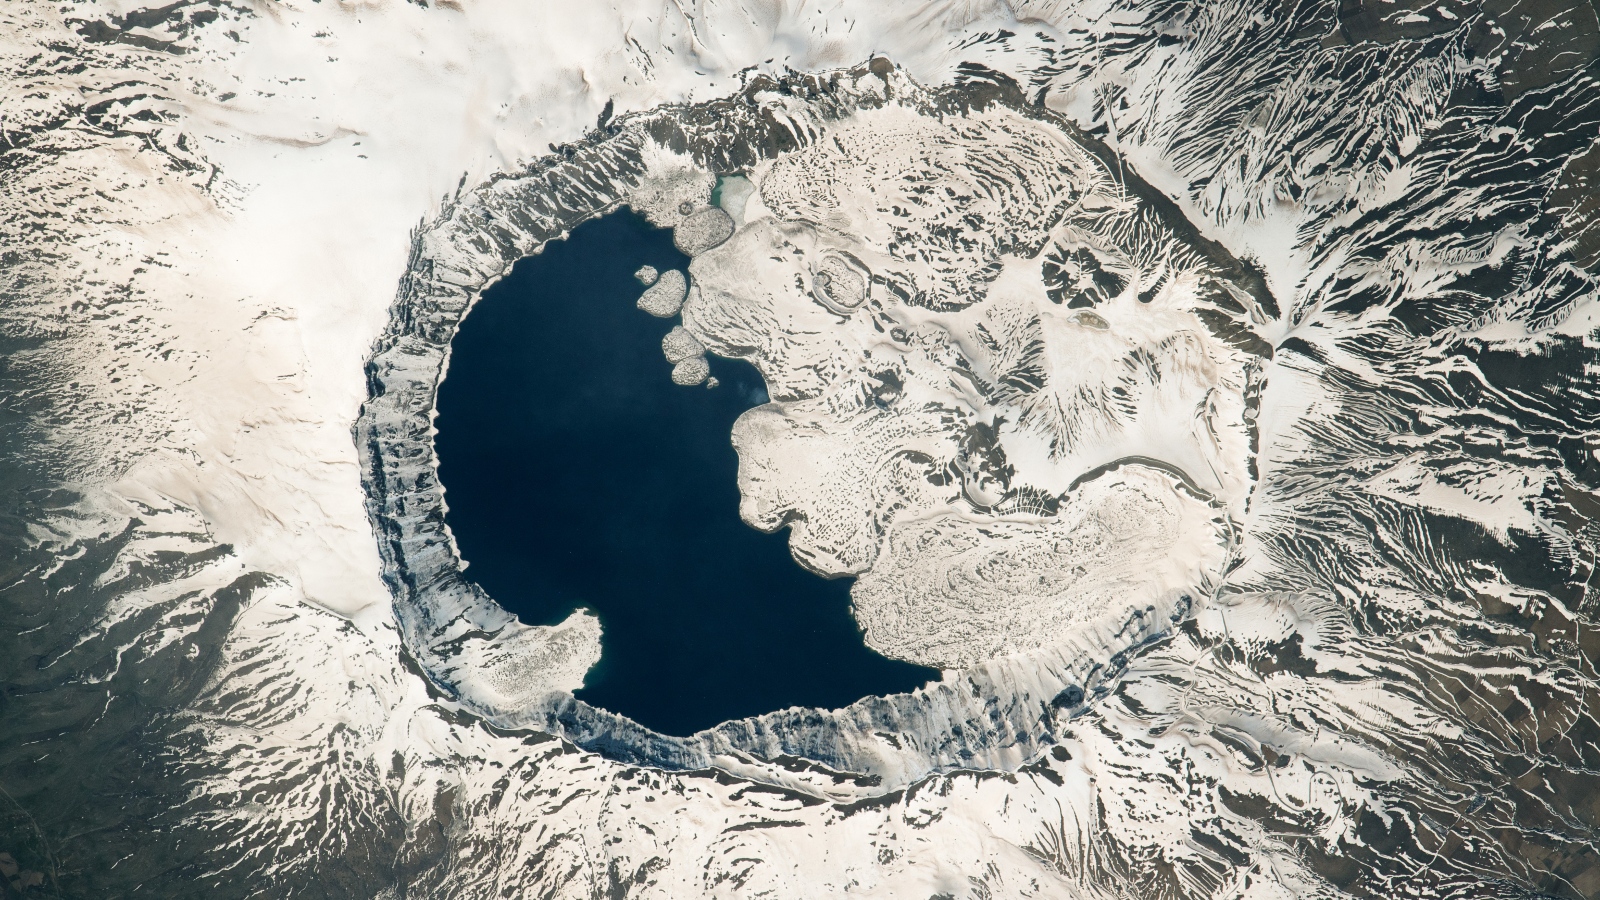 Earth from space: Majestic 'yin-yang' crater sits atop a dormant volcano in Turkey